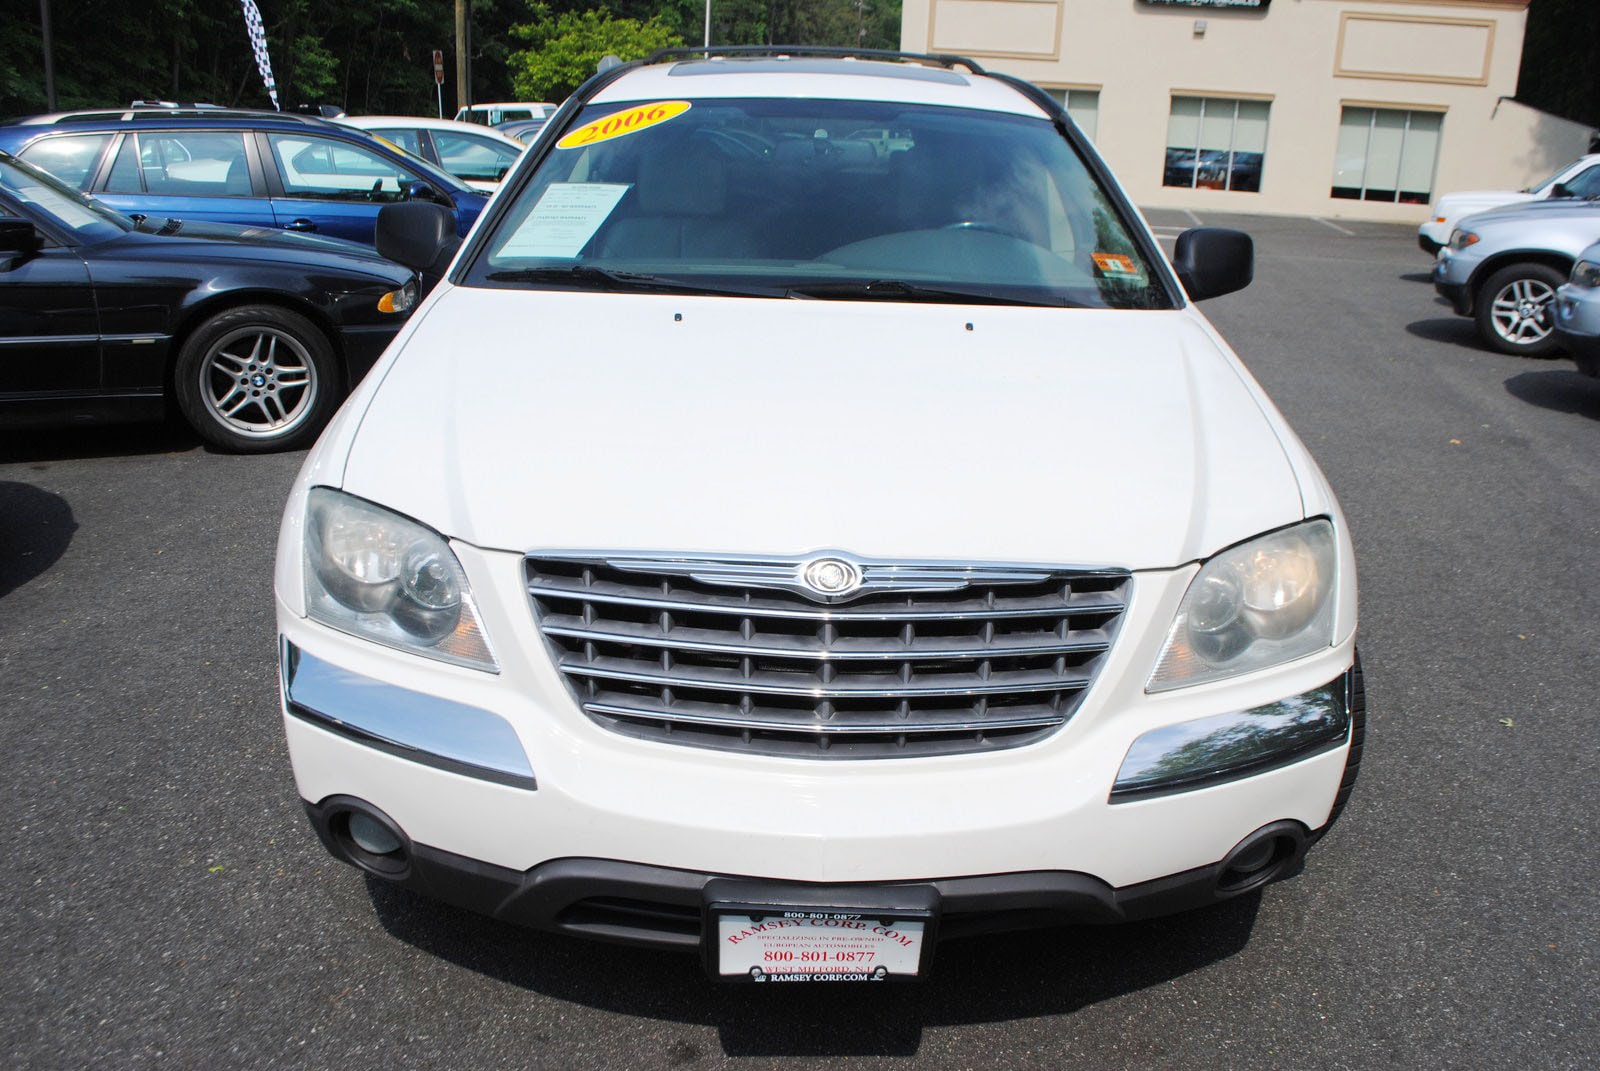 Used 2006 Chrysler Pacifica For Sale West Milford NJ